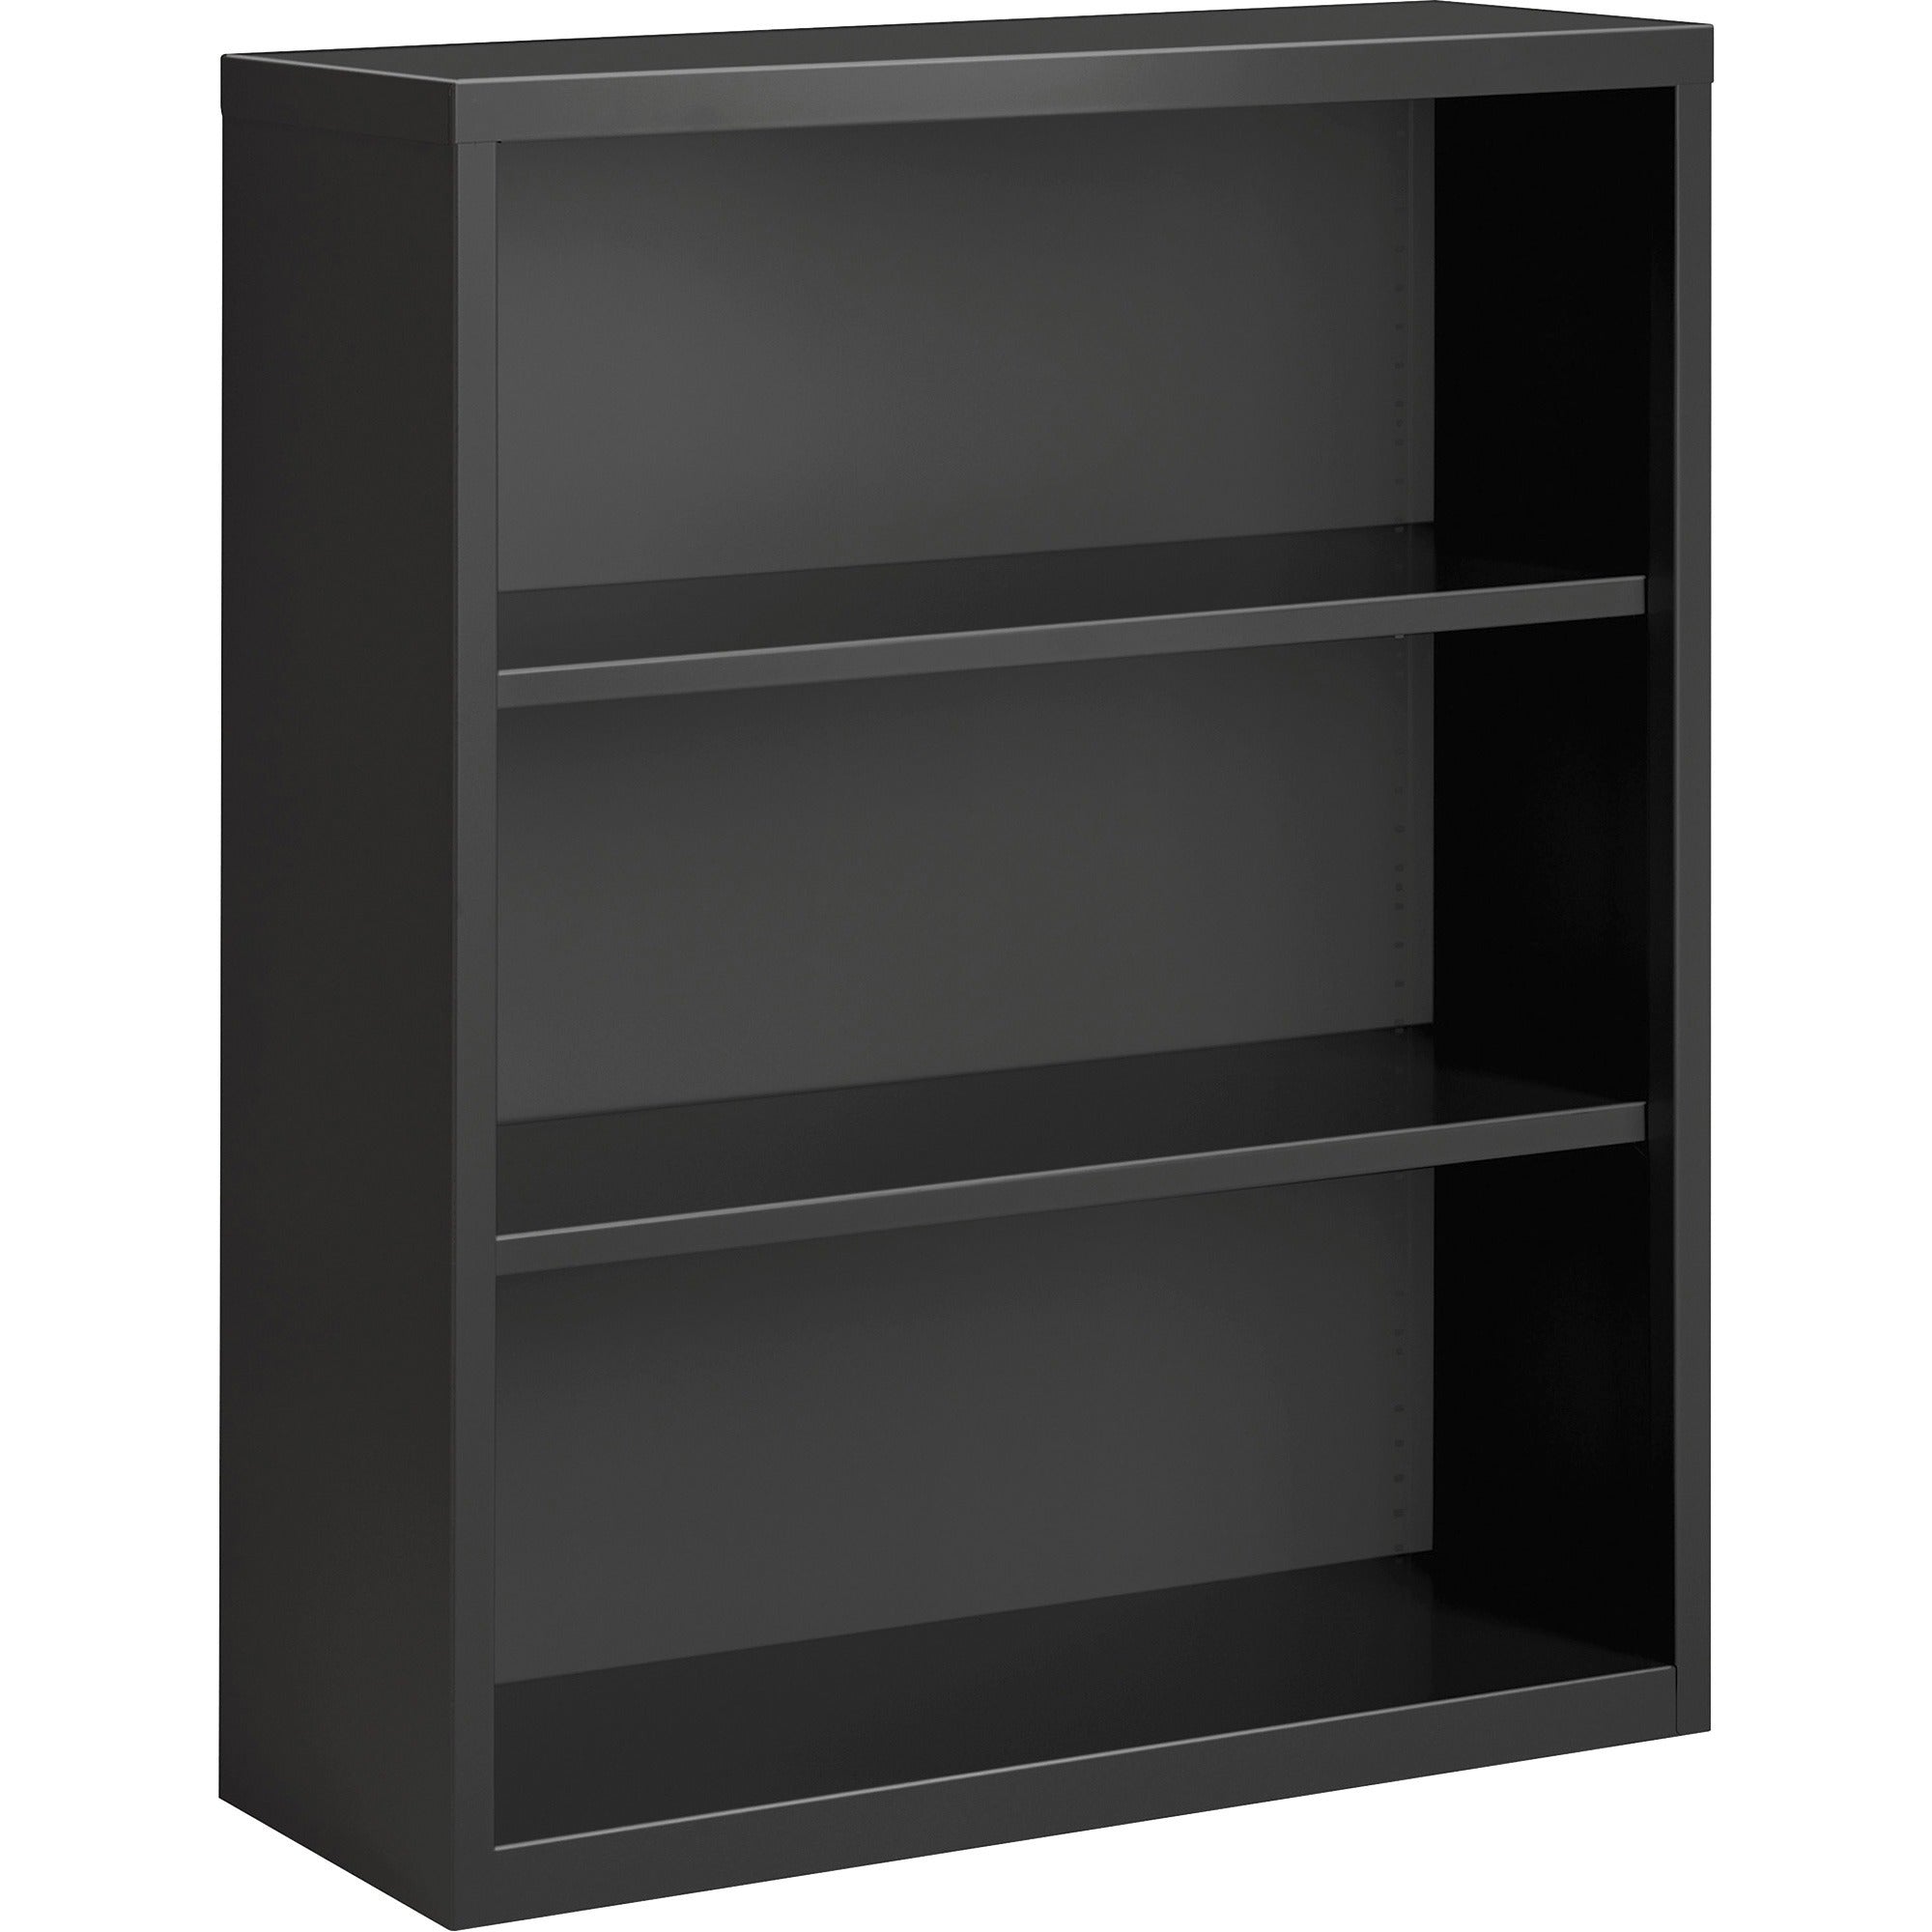 lorell-fortress-series-bookcase-345-x-1342-3-shelves-material-steel-finish-charcoal-powder-coated-adjustable-shelf-welded-durable_llr59692 - 1